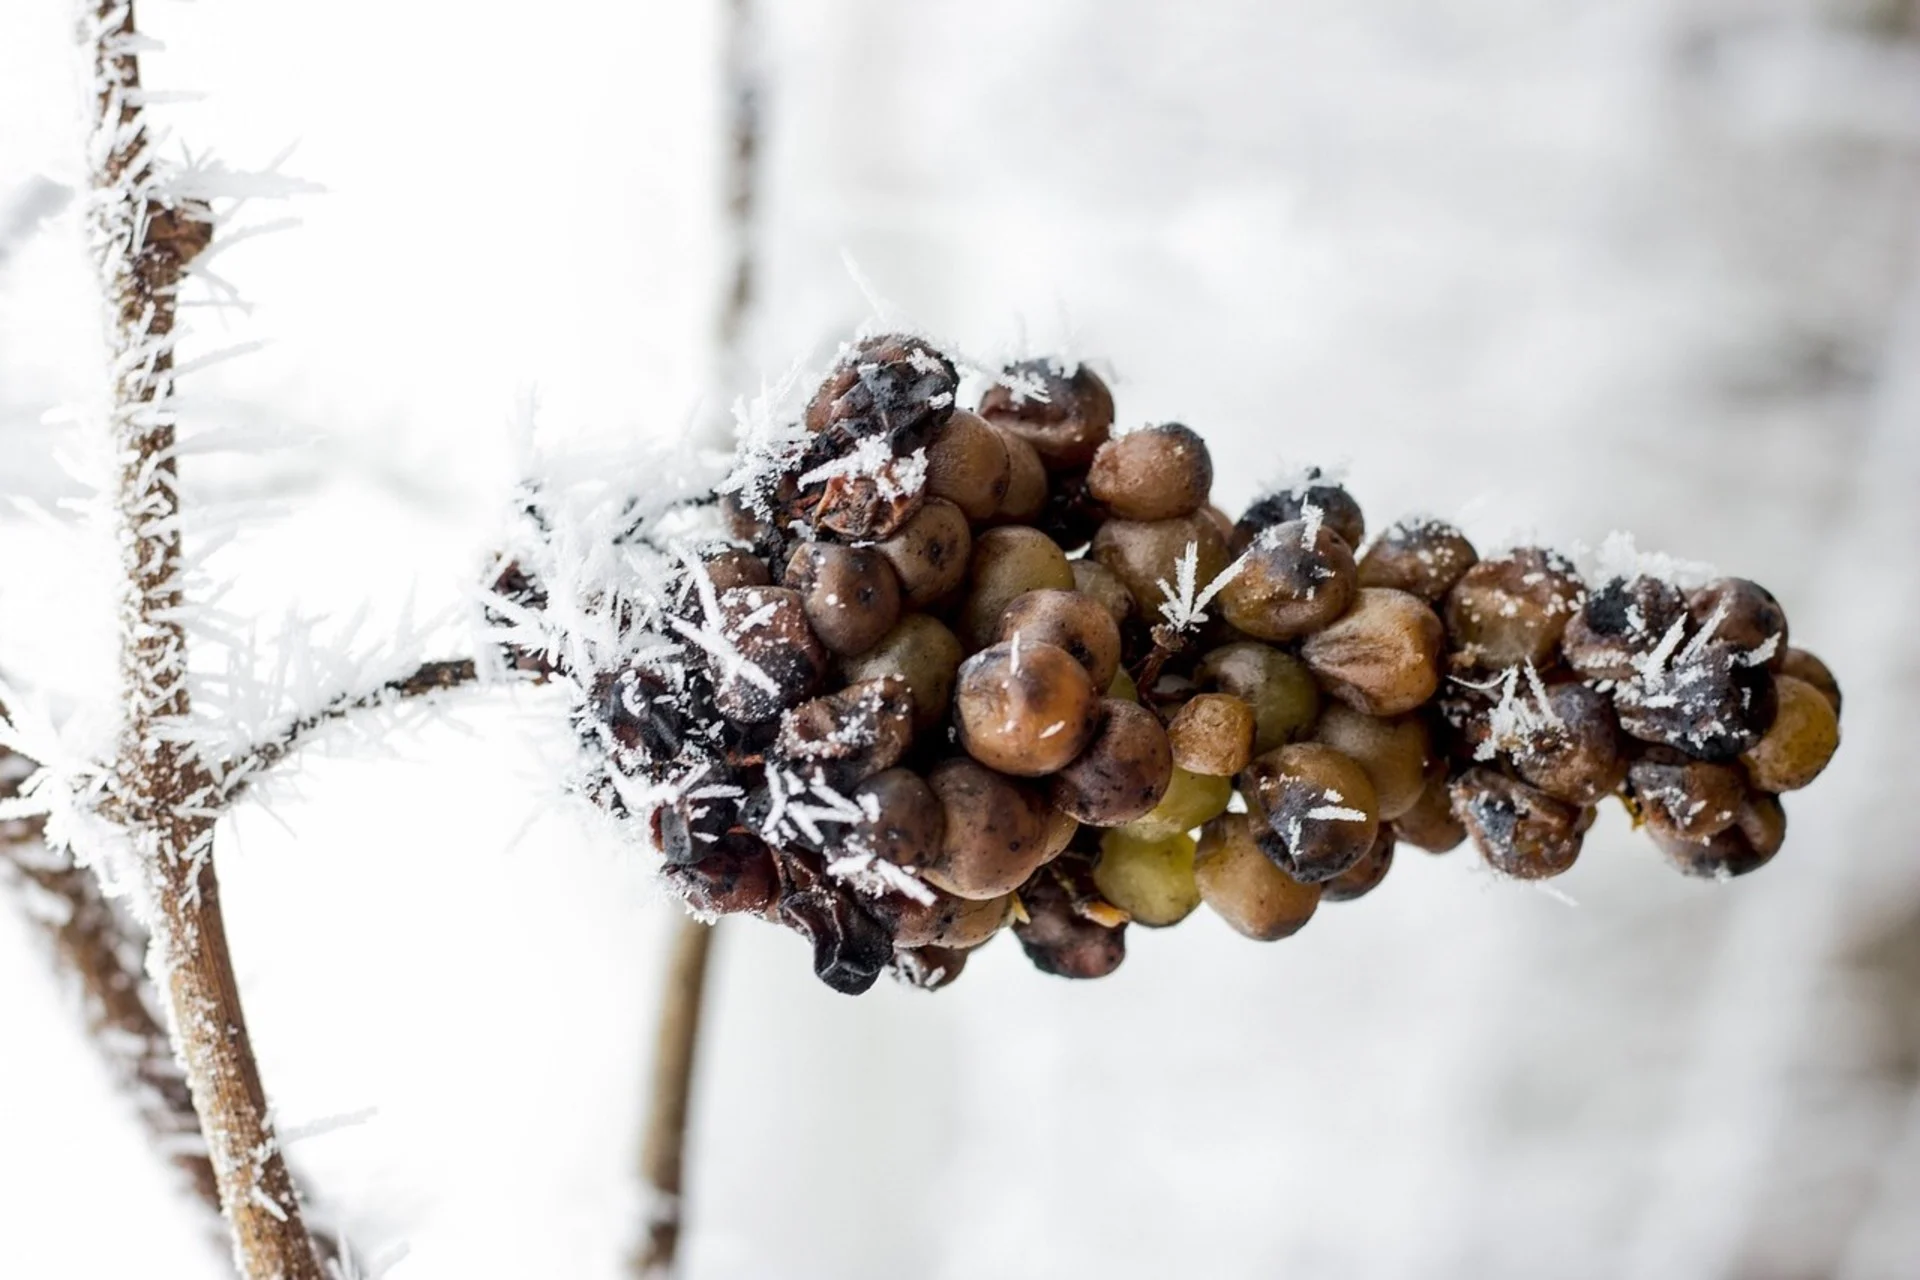 Winemakers adapt grape varieties due to extreme weather